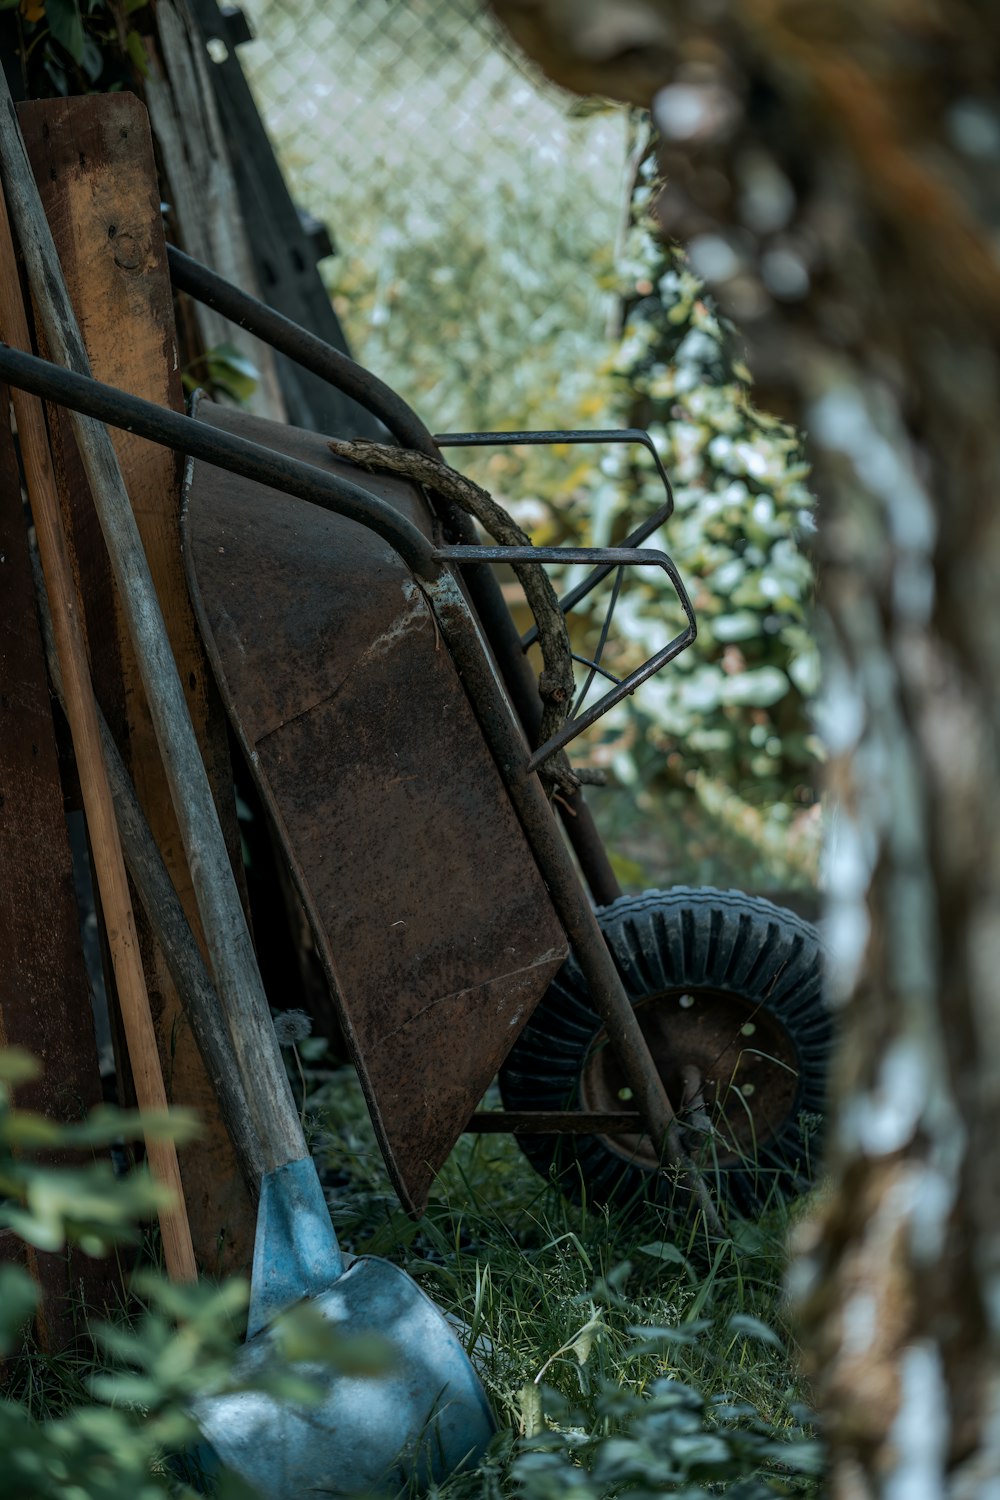 a wheelbarrow leaning against a fence in the grass